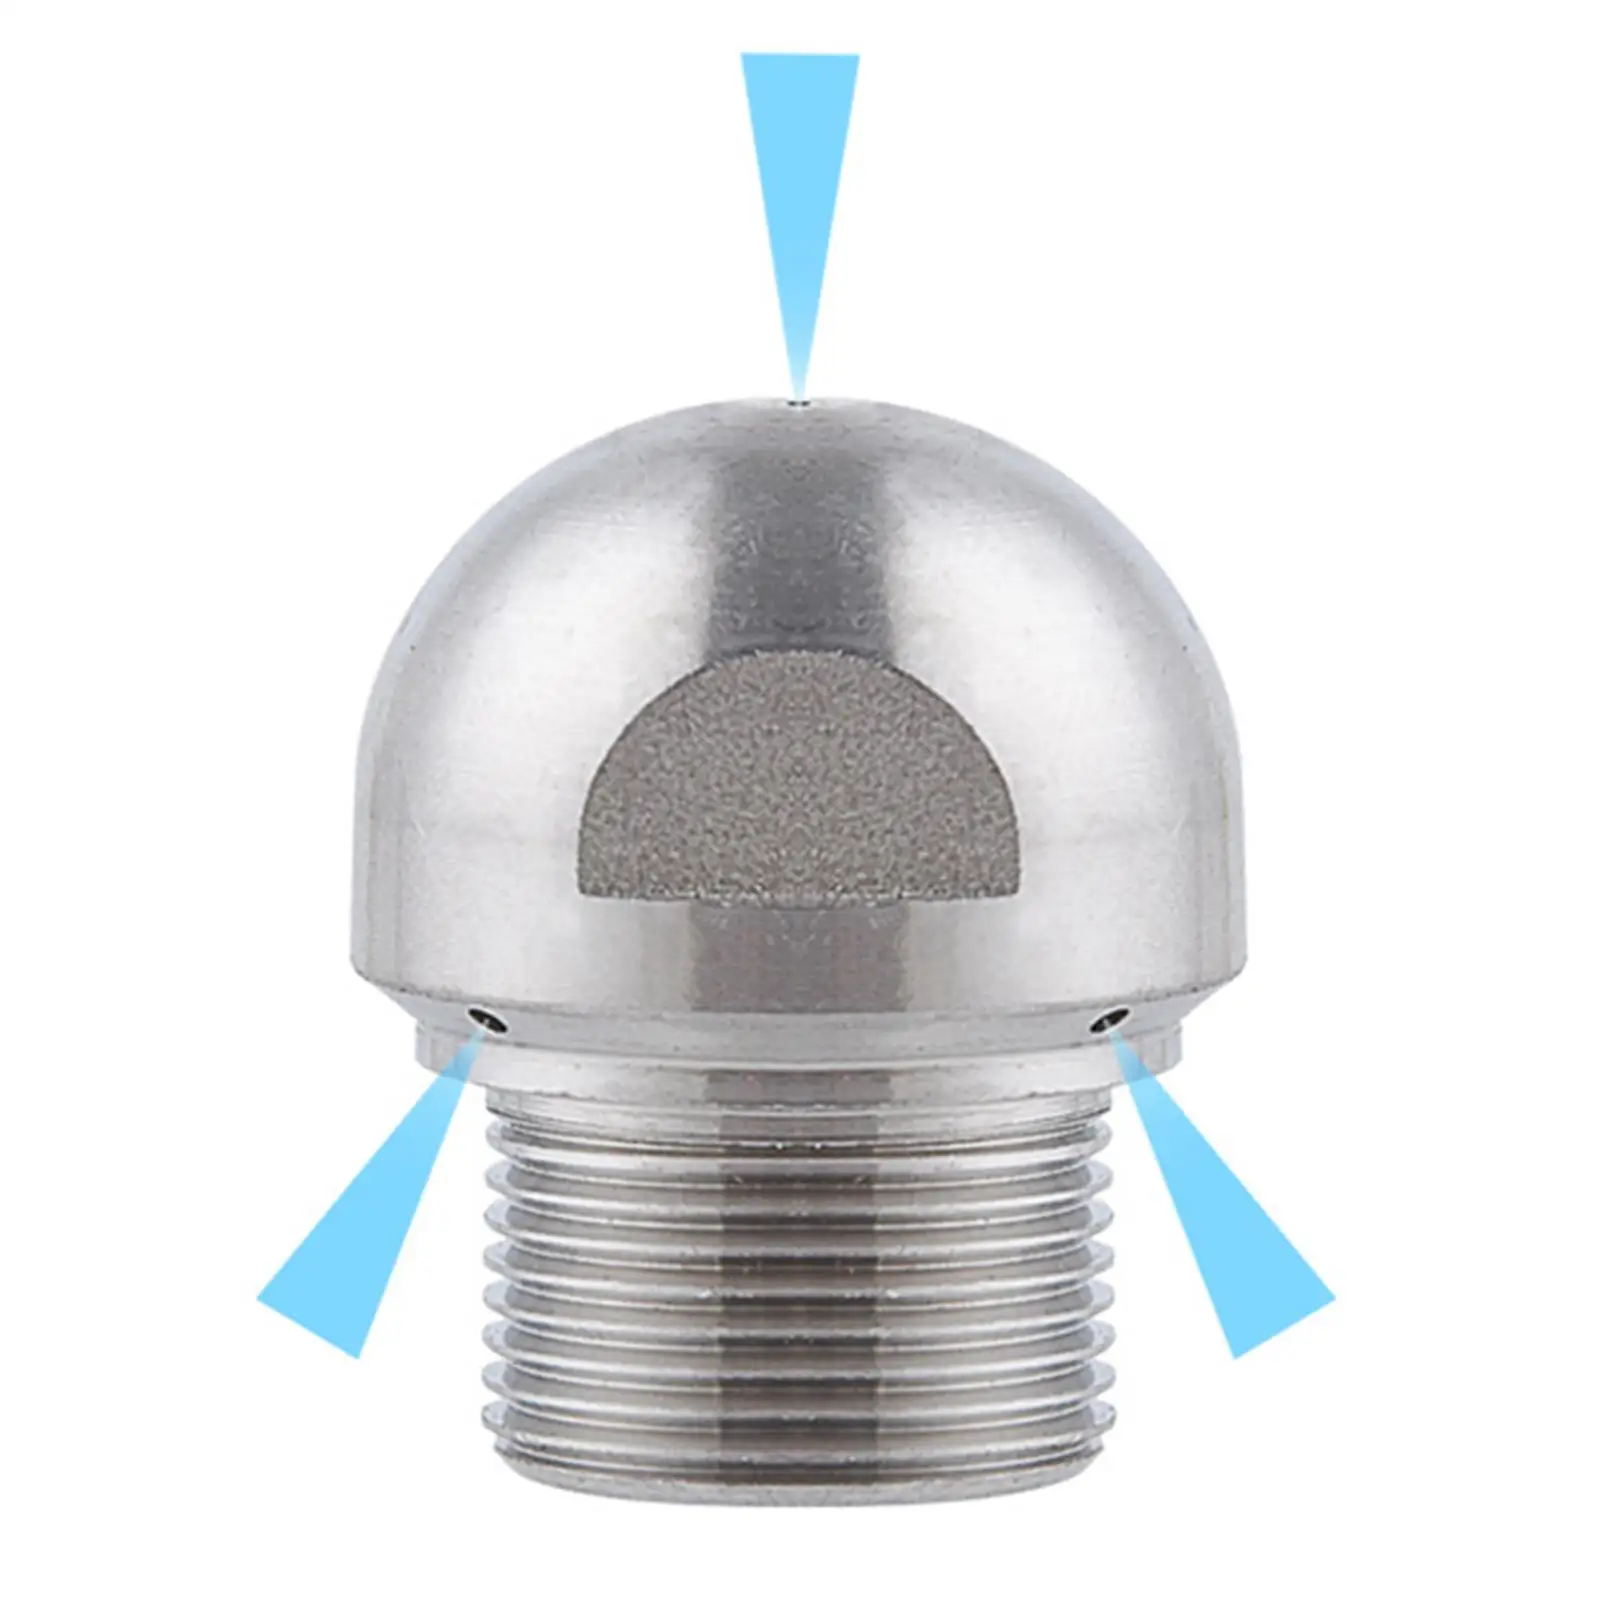 Rotating Button Nose Sewer Jetting Nozzle Pressure up to 300Bar 1/4`` Quick Connect for Sewer Pressure Washer Accessories